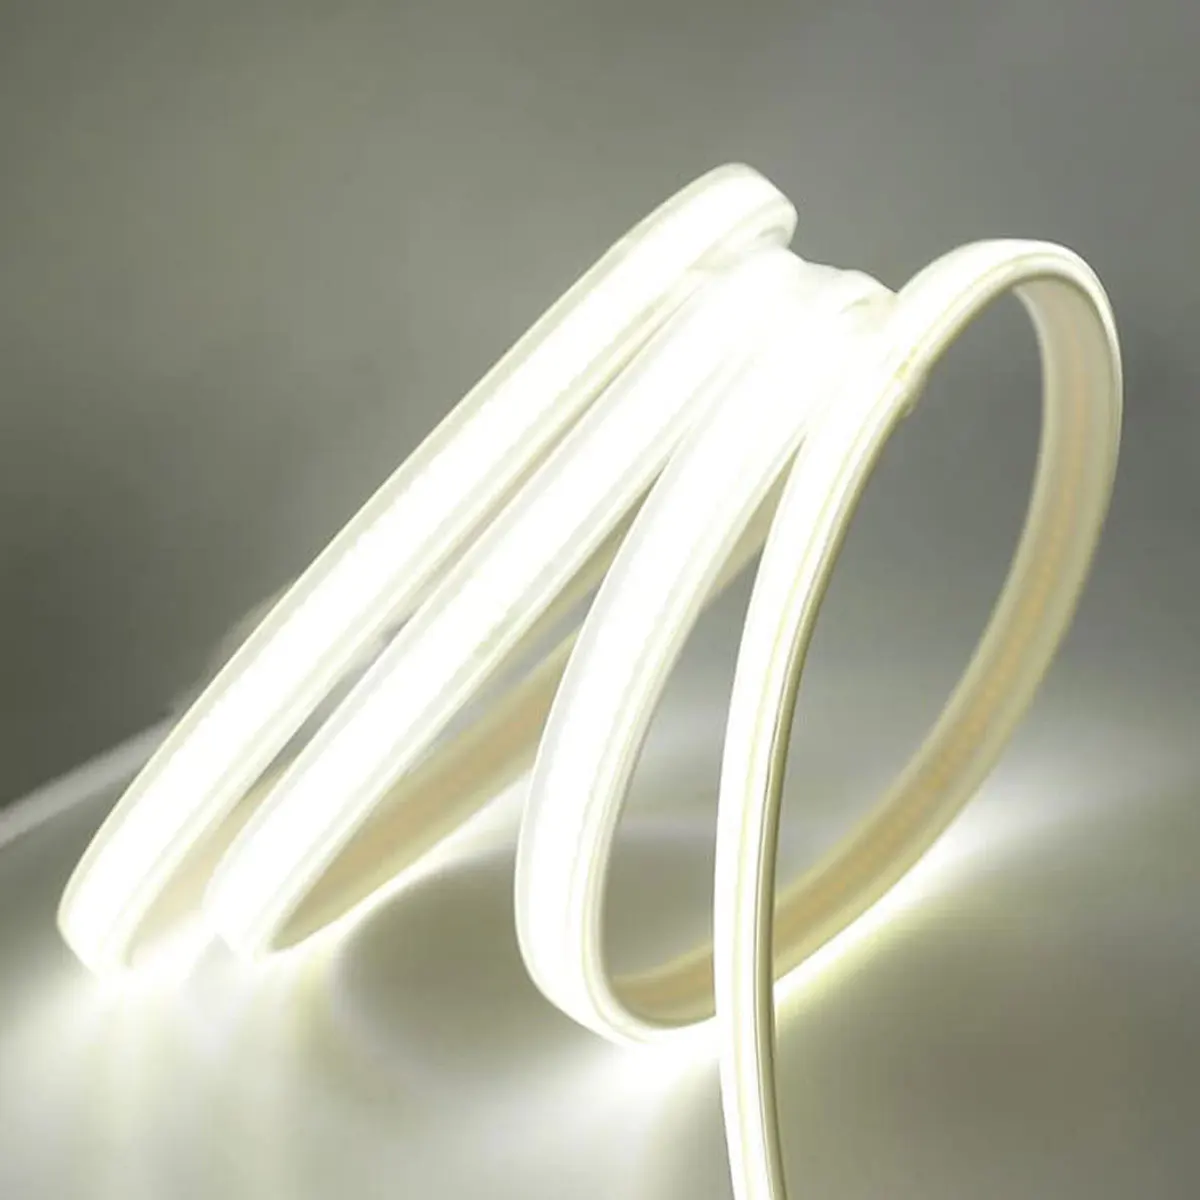 Flexible AC110/220V High Density 288 LEDs/M Super Bright Dimmable Waterproof COB Light Strip Rope for Party Stage Living Room